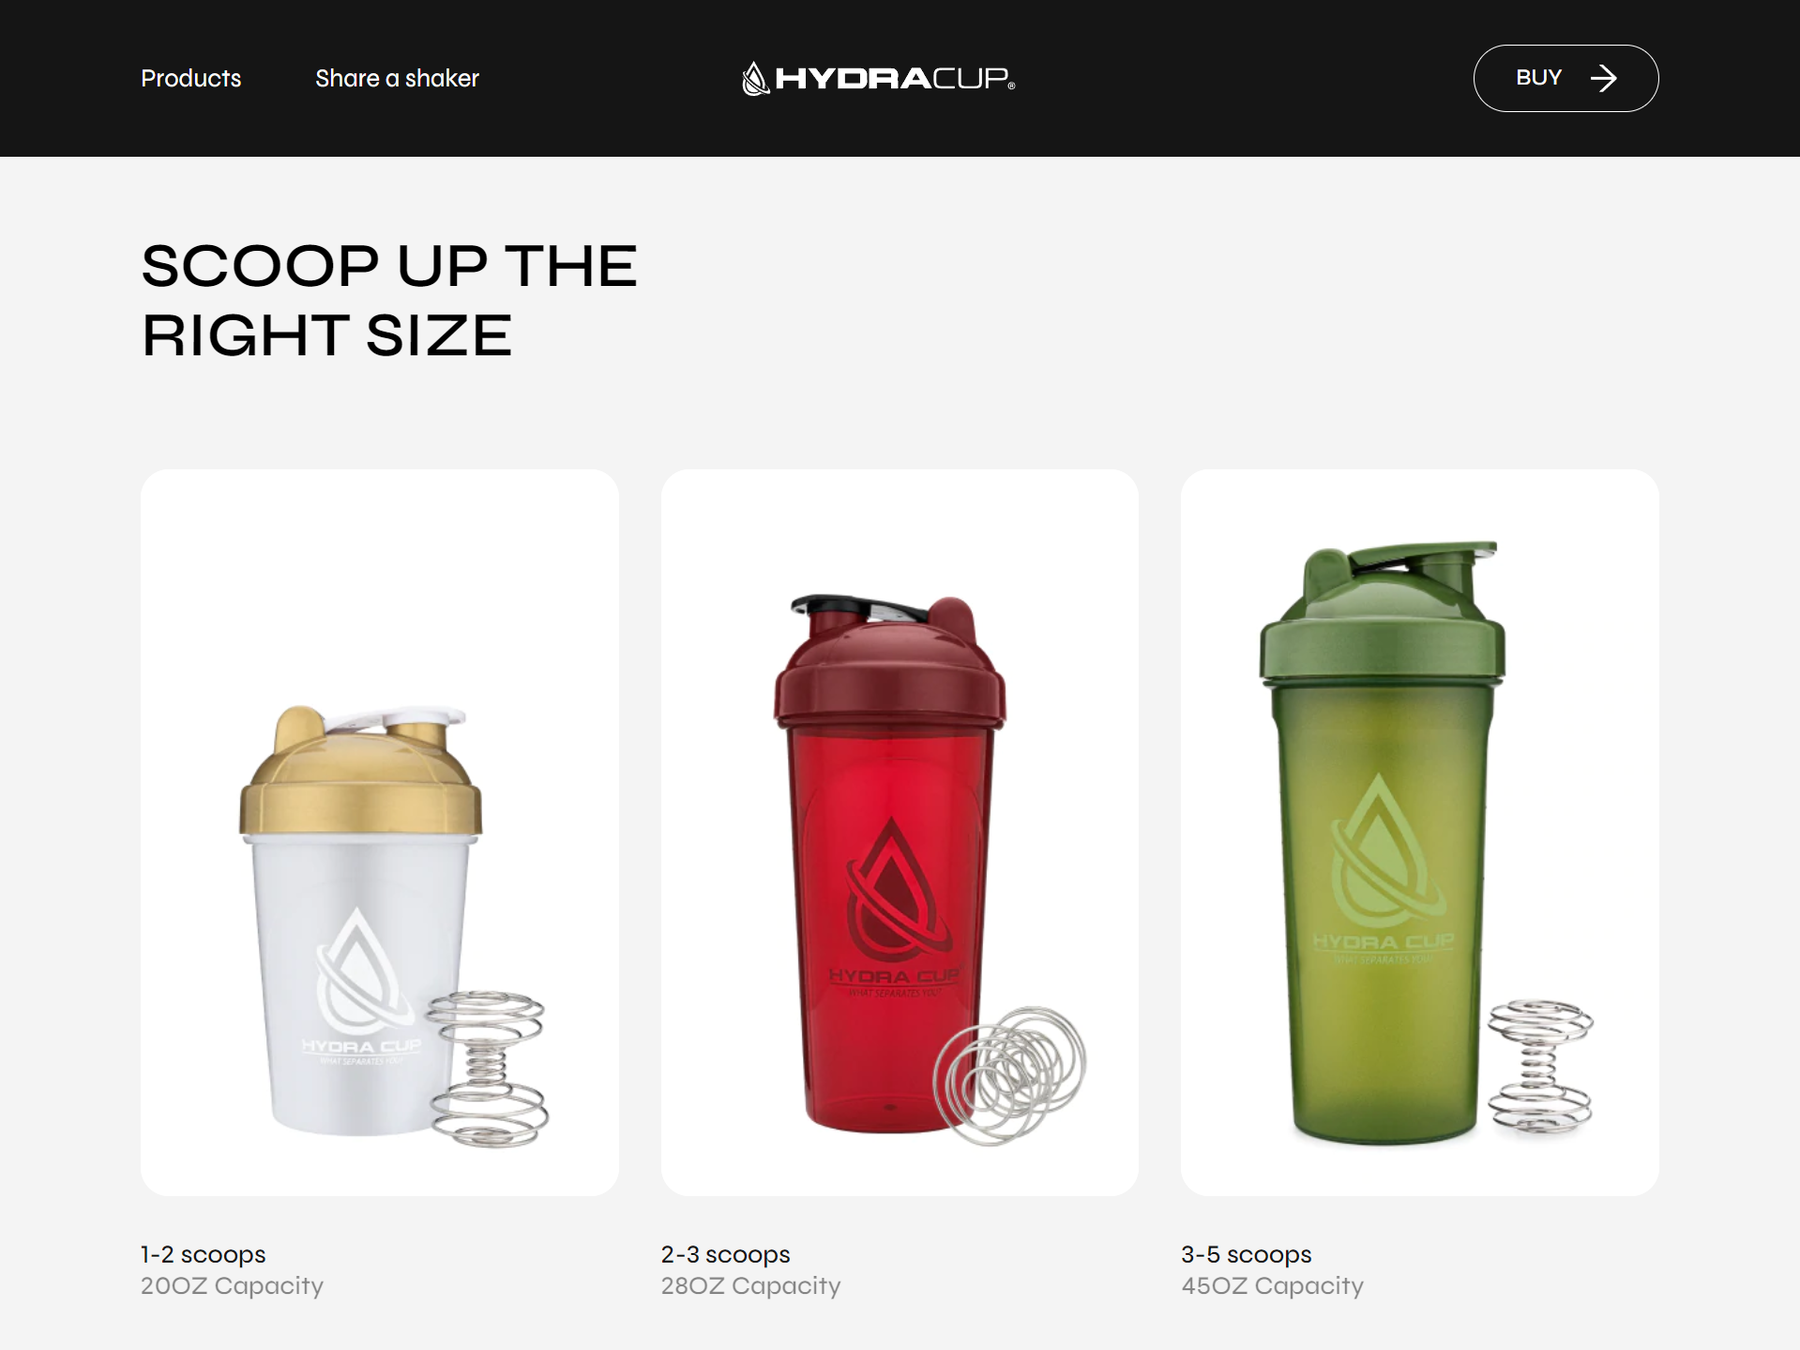 Hydracup products